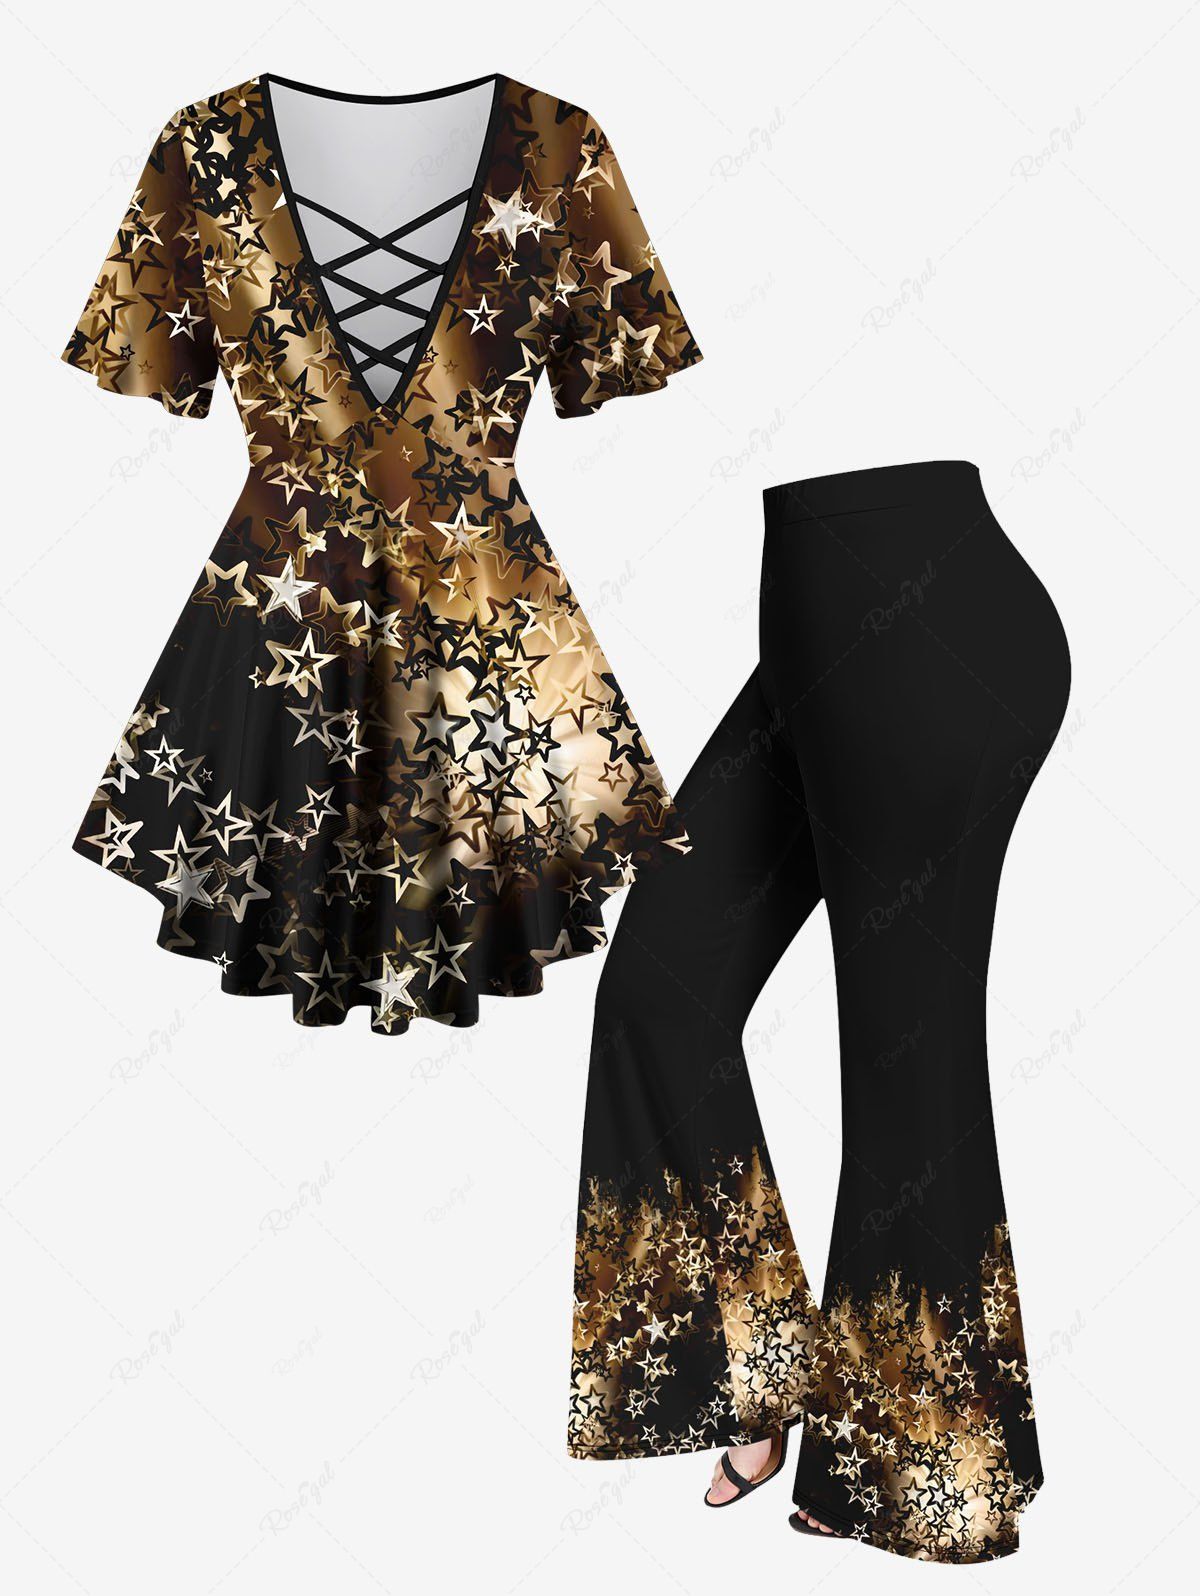 Hot Glitter Light Beam Stars Printed Lattice Ombre Top and Flare Pants Plus Size Matching Set  